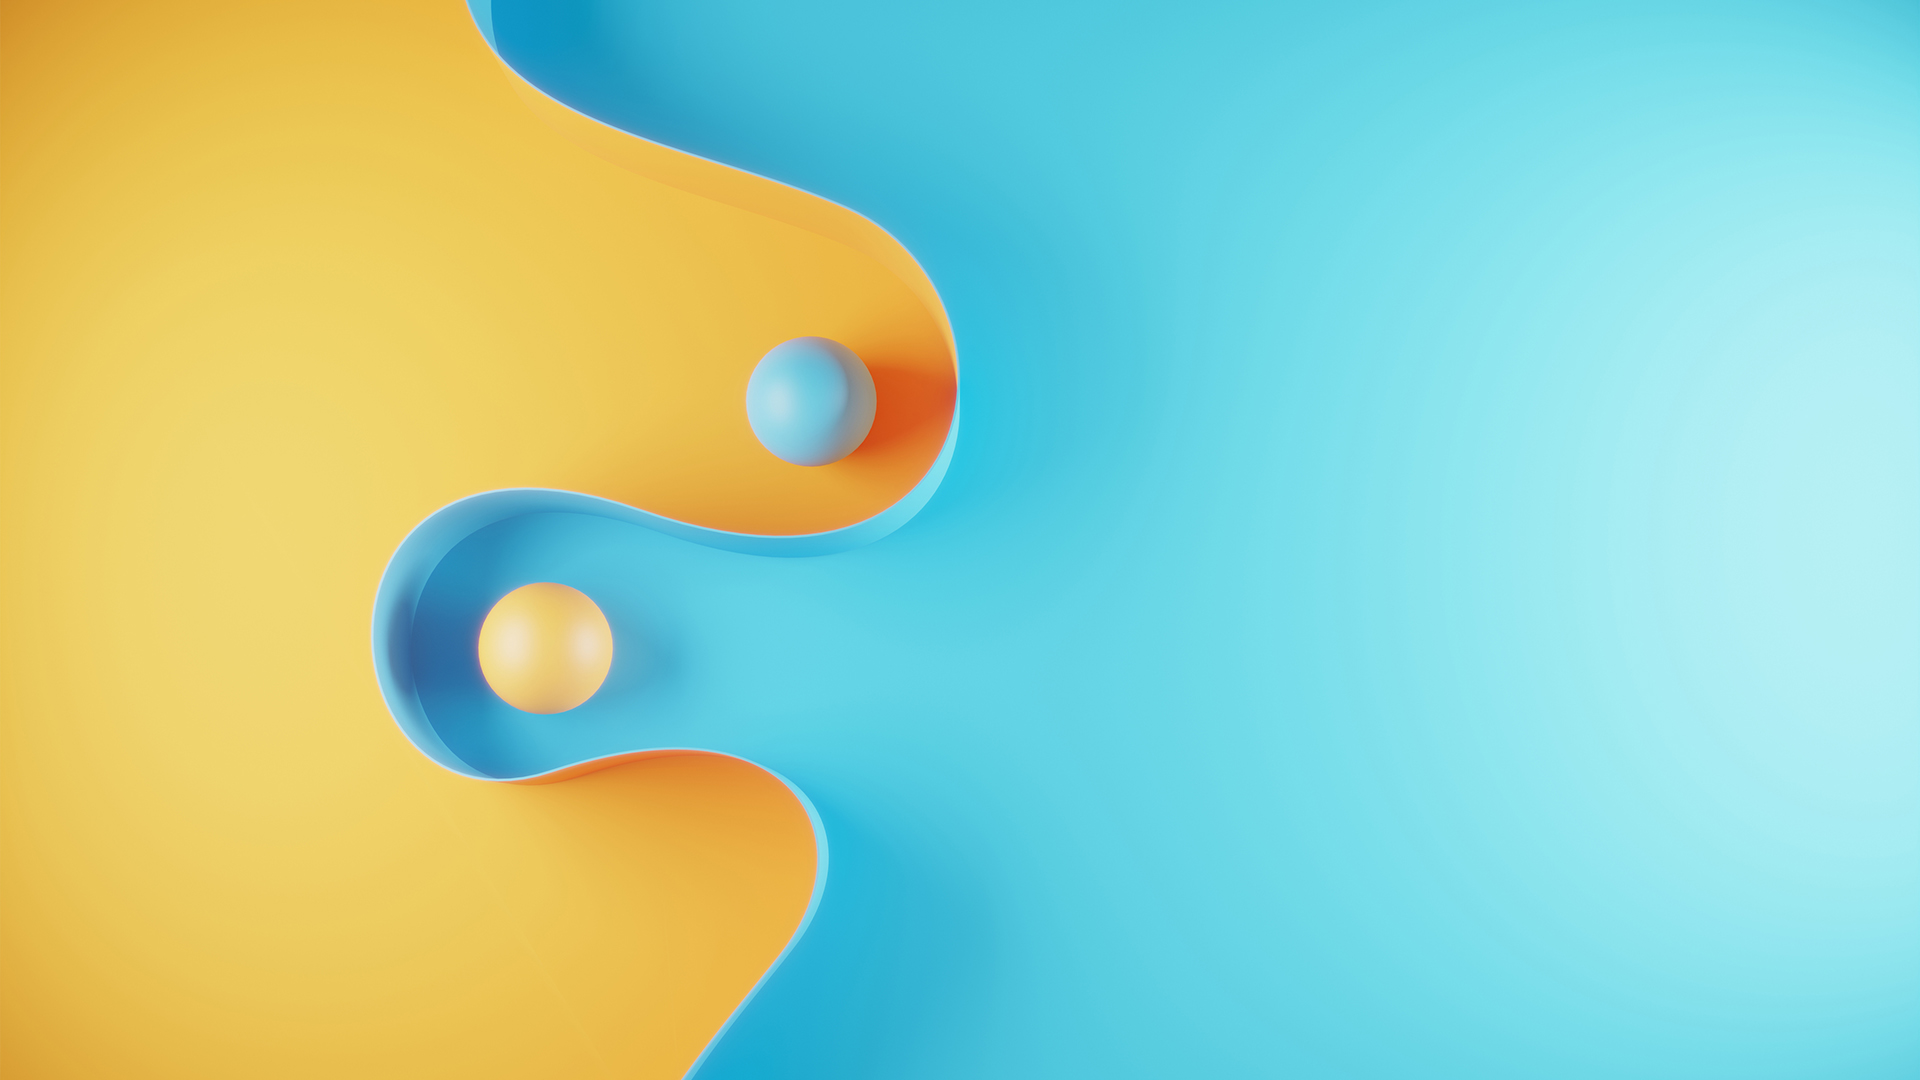 Two balls inbetween curved paper, one ball is yellow on a blue background, one ball is blue on a yellow background